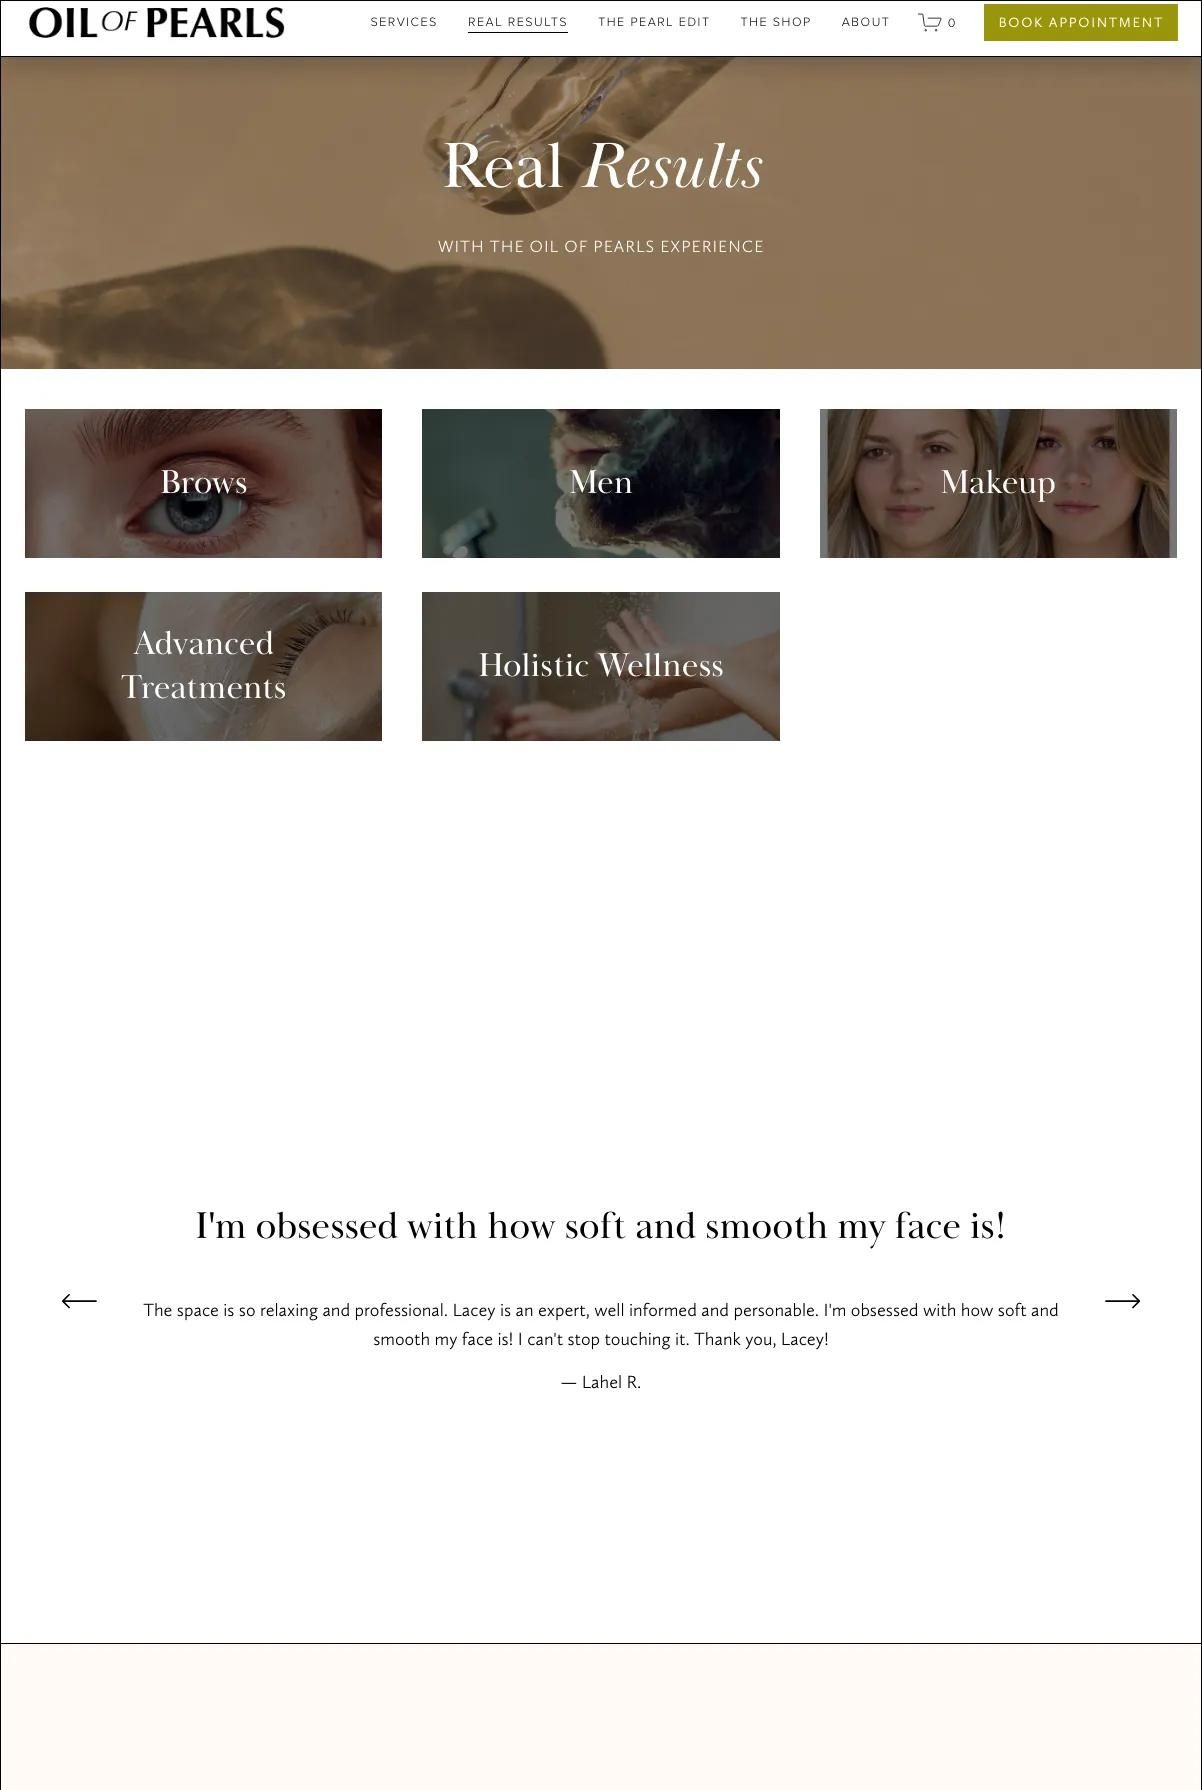 Screenshot 3 of OIL OF PEARLS (Example Squarespace Esthetician Website)